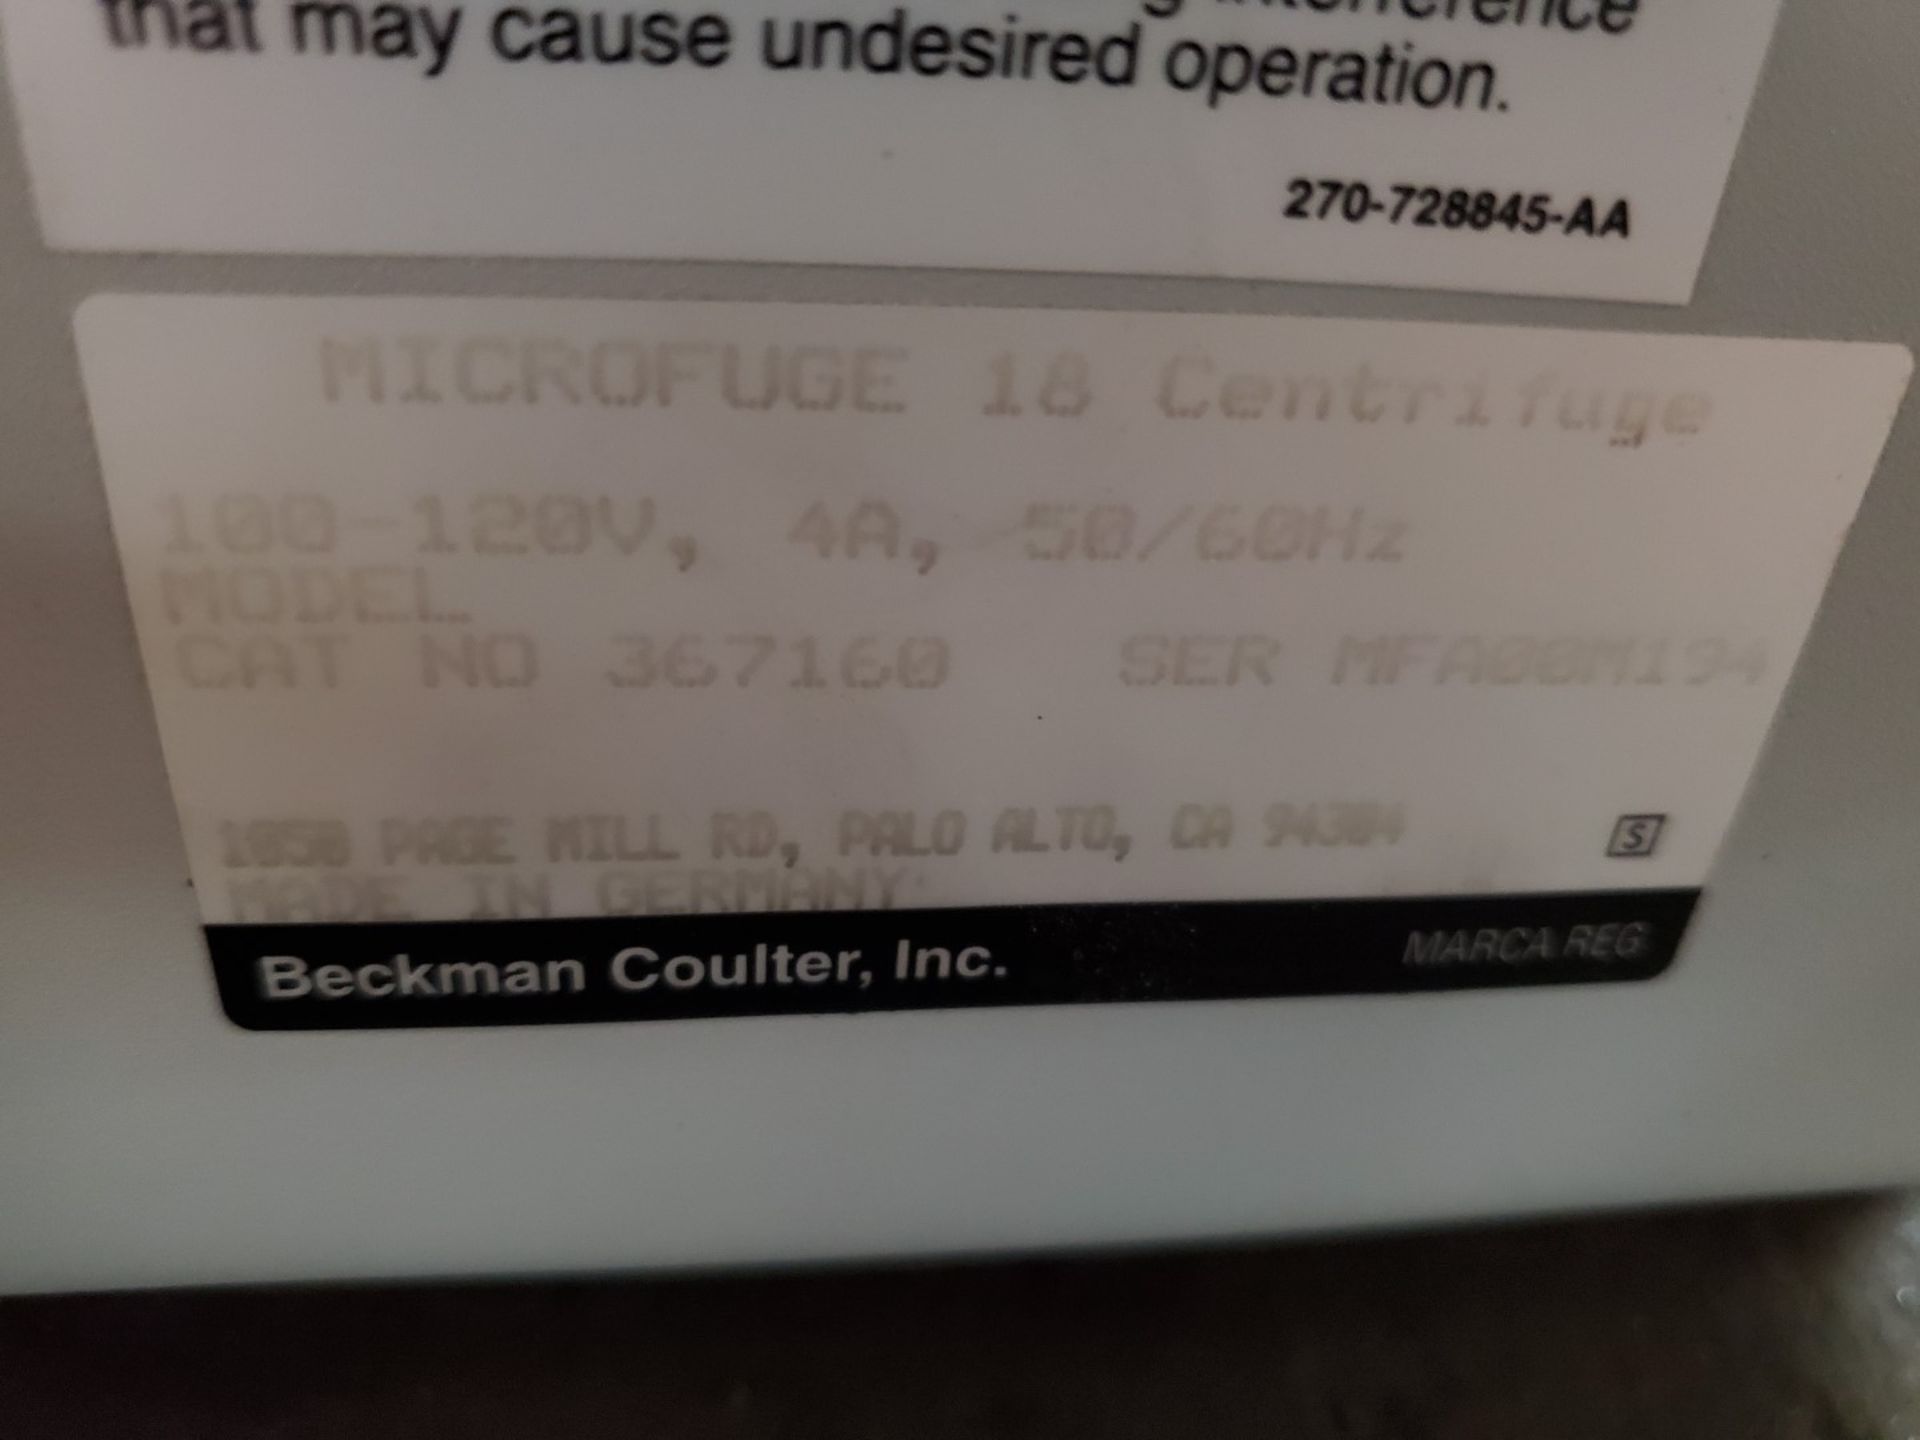 Beckman Coulter Microfuge 18 Centrifuge, 14000RPM max, with timer - Image 2 of 3